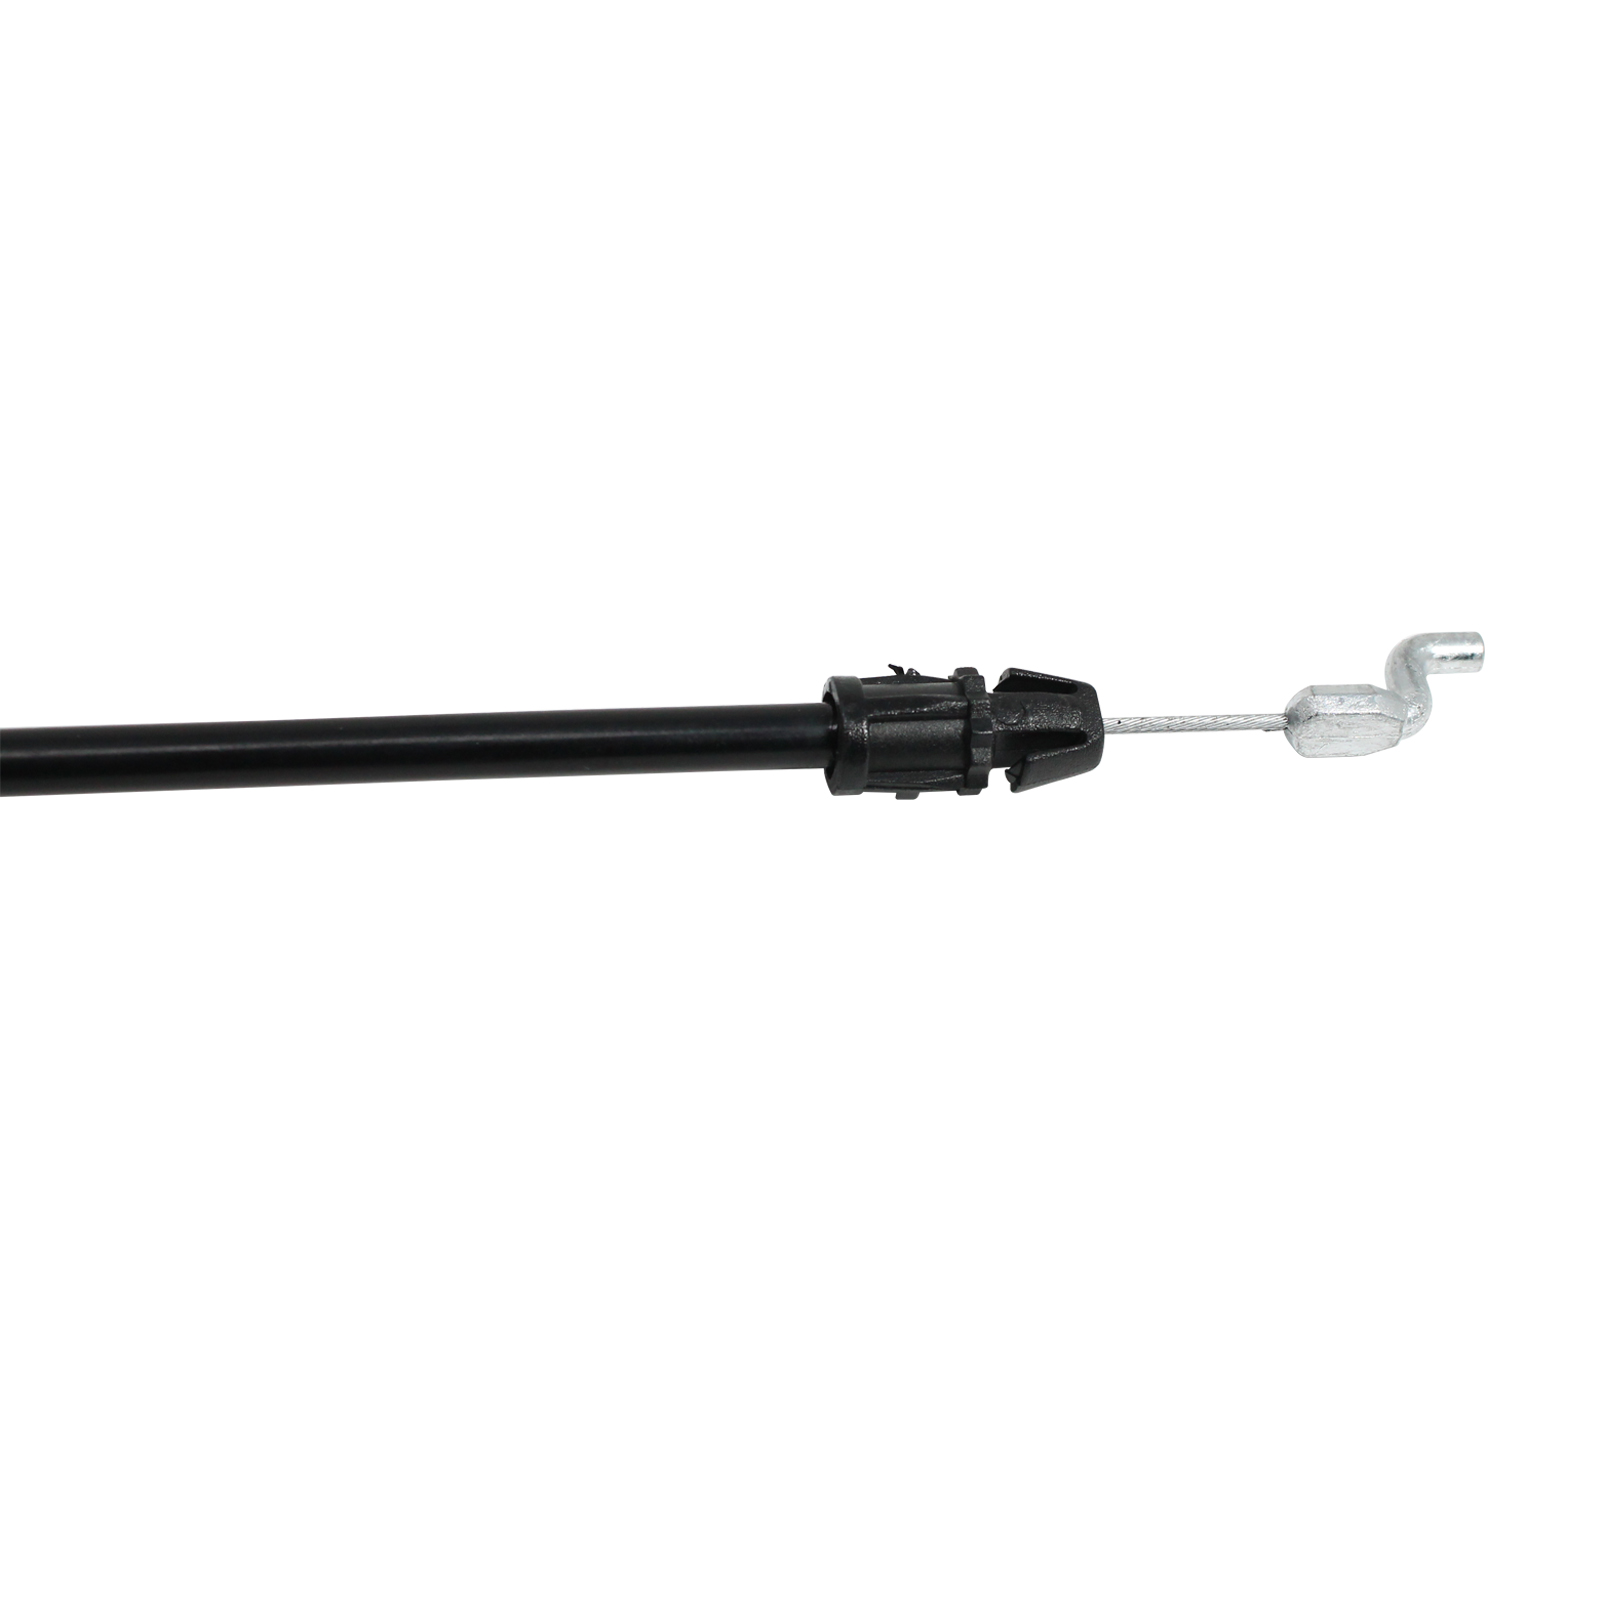 2-Pack 532176556 Engine Cable Replacement for Husqvarna ROTARY LAWN MOWER (96134000601) (2007-11) Lawn Mower: Consumer Walk Behind - Compatible with 176556 162778 Zone Control Cable - image 3 of 4